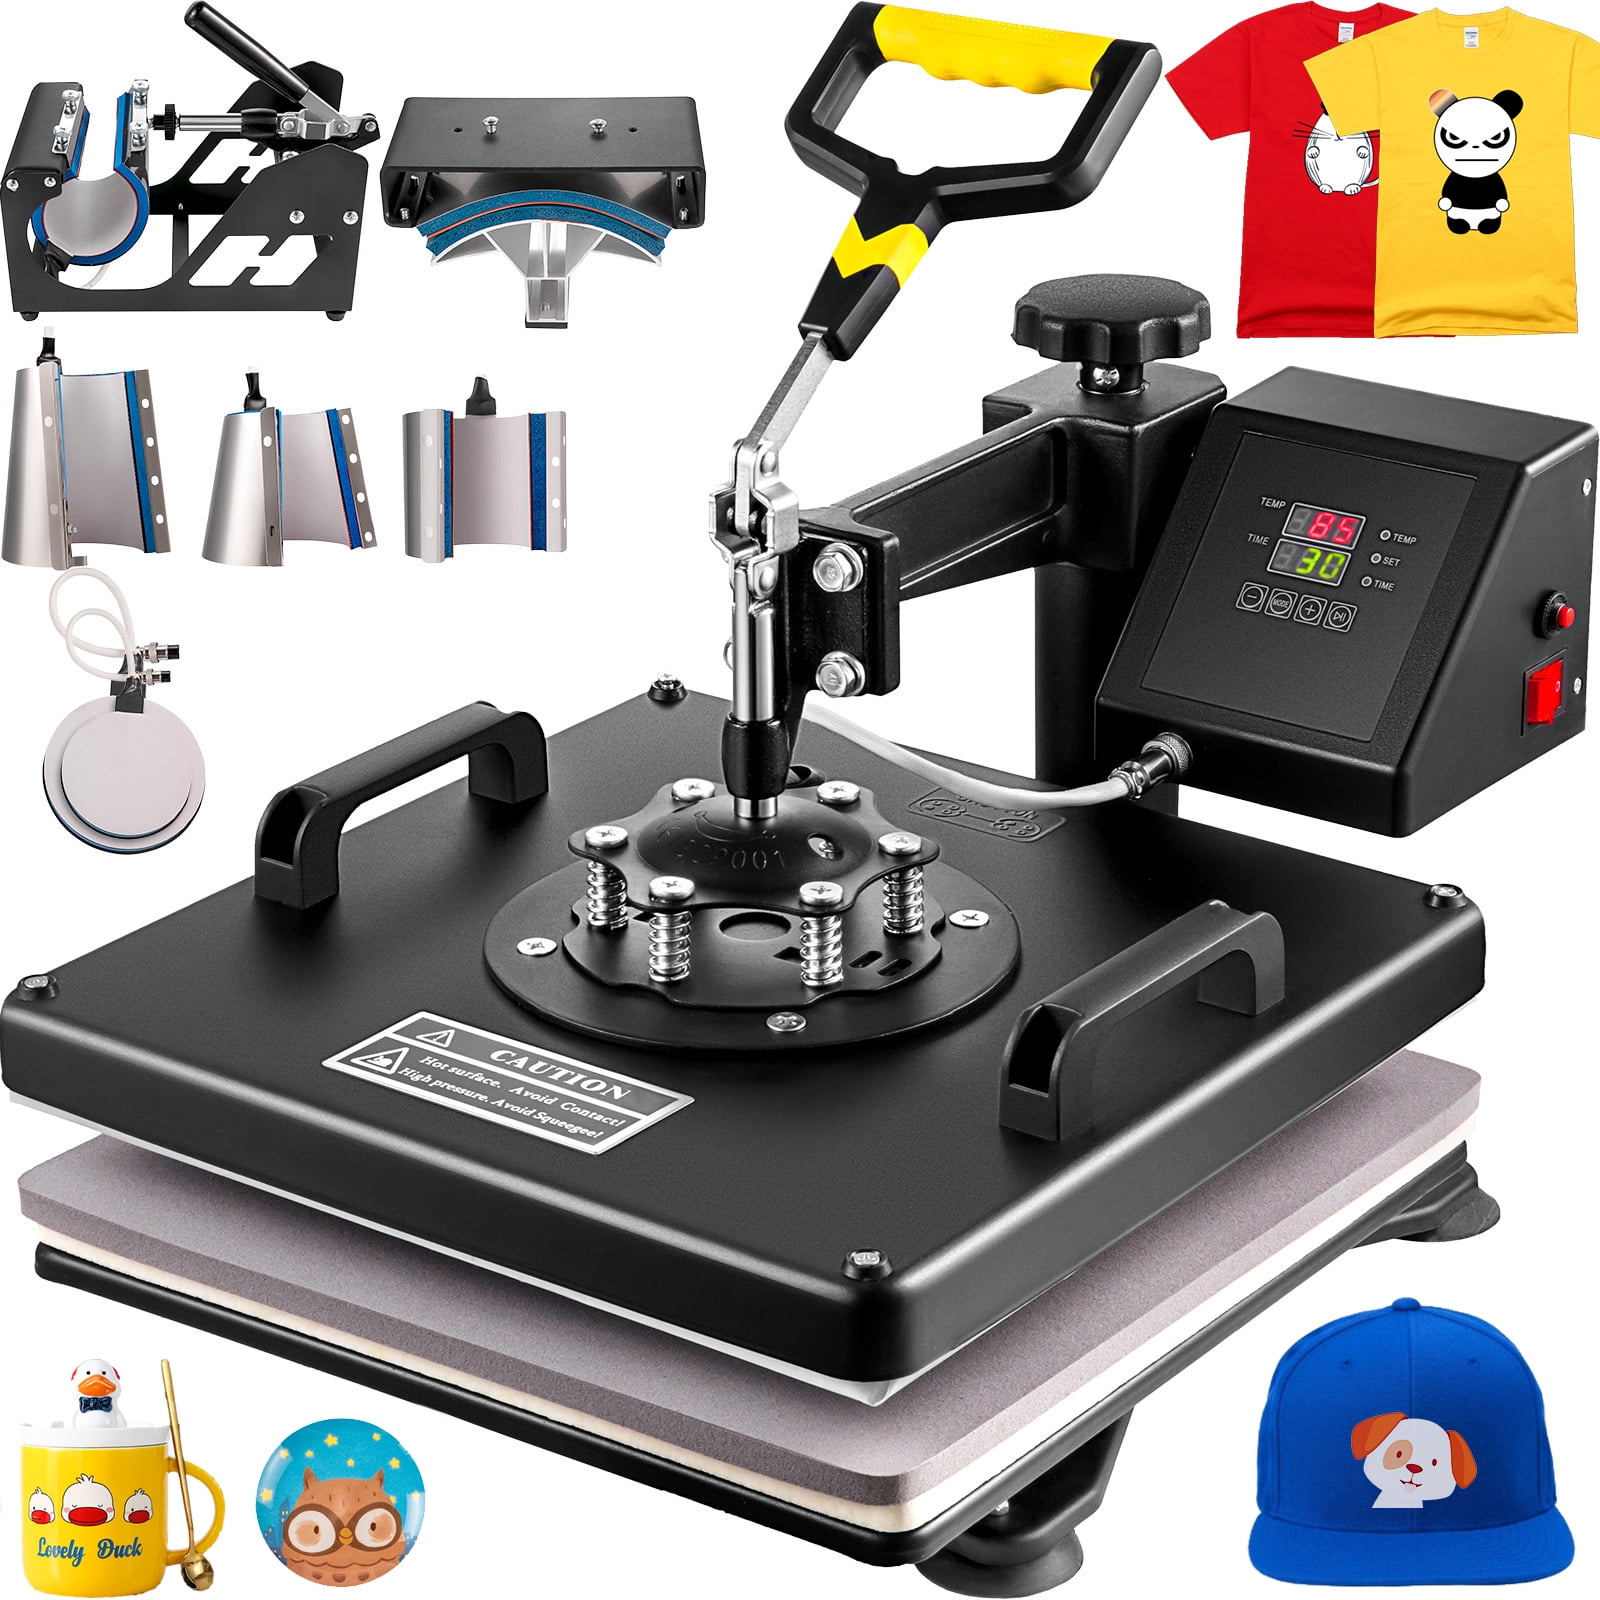 8 in 1 Heat Press Machine For T-Shirts 15"x15" Combo Kit Sublimation Swing away 